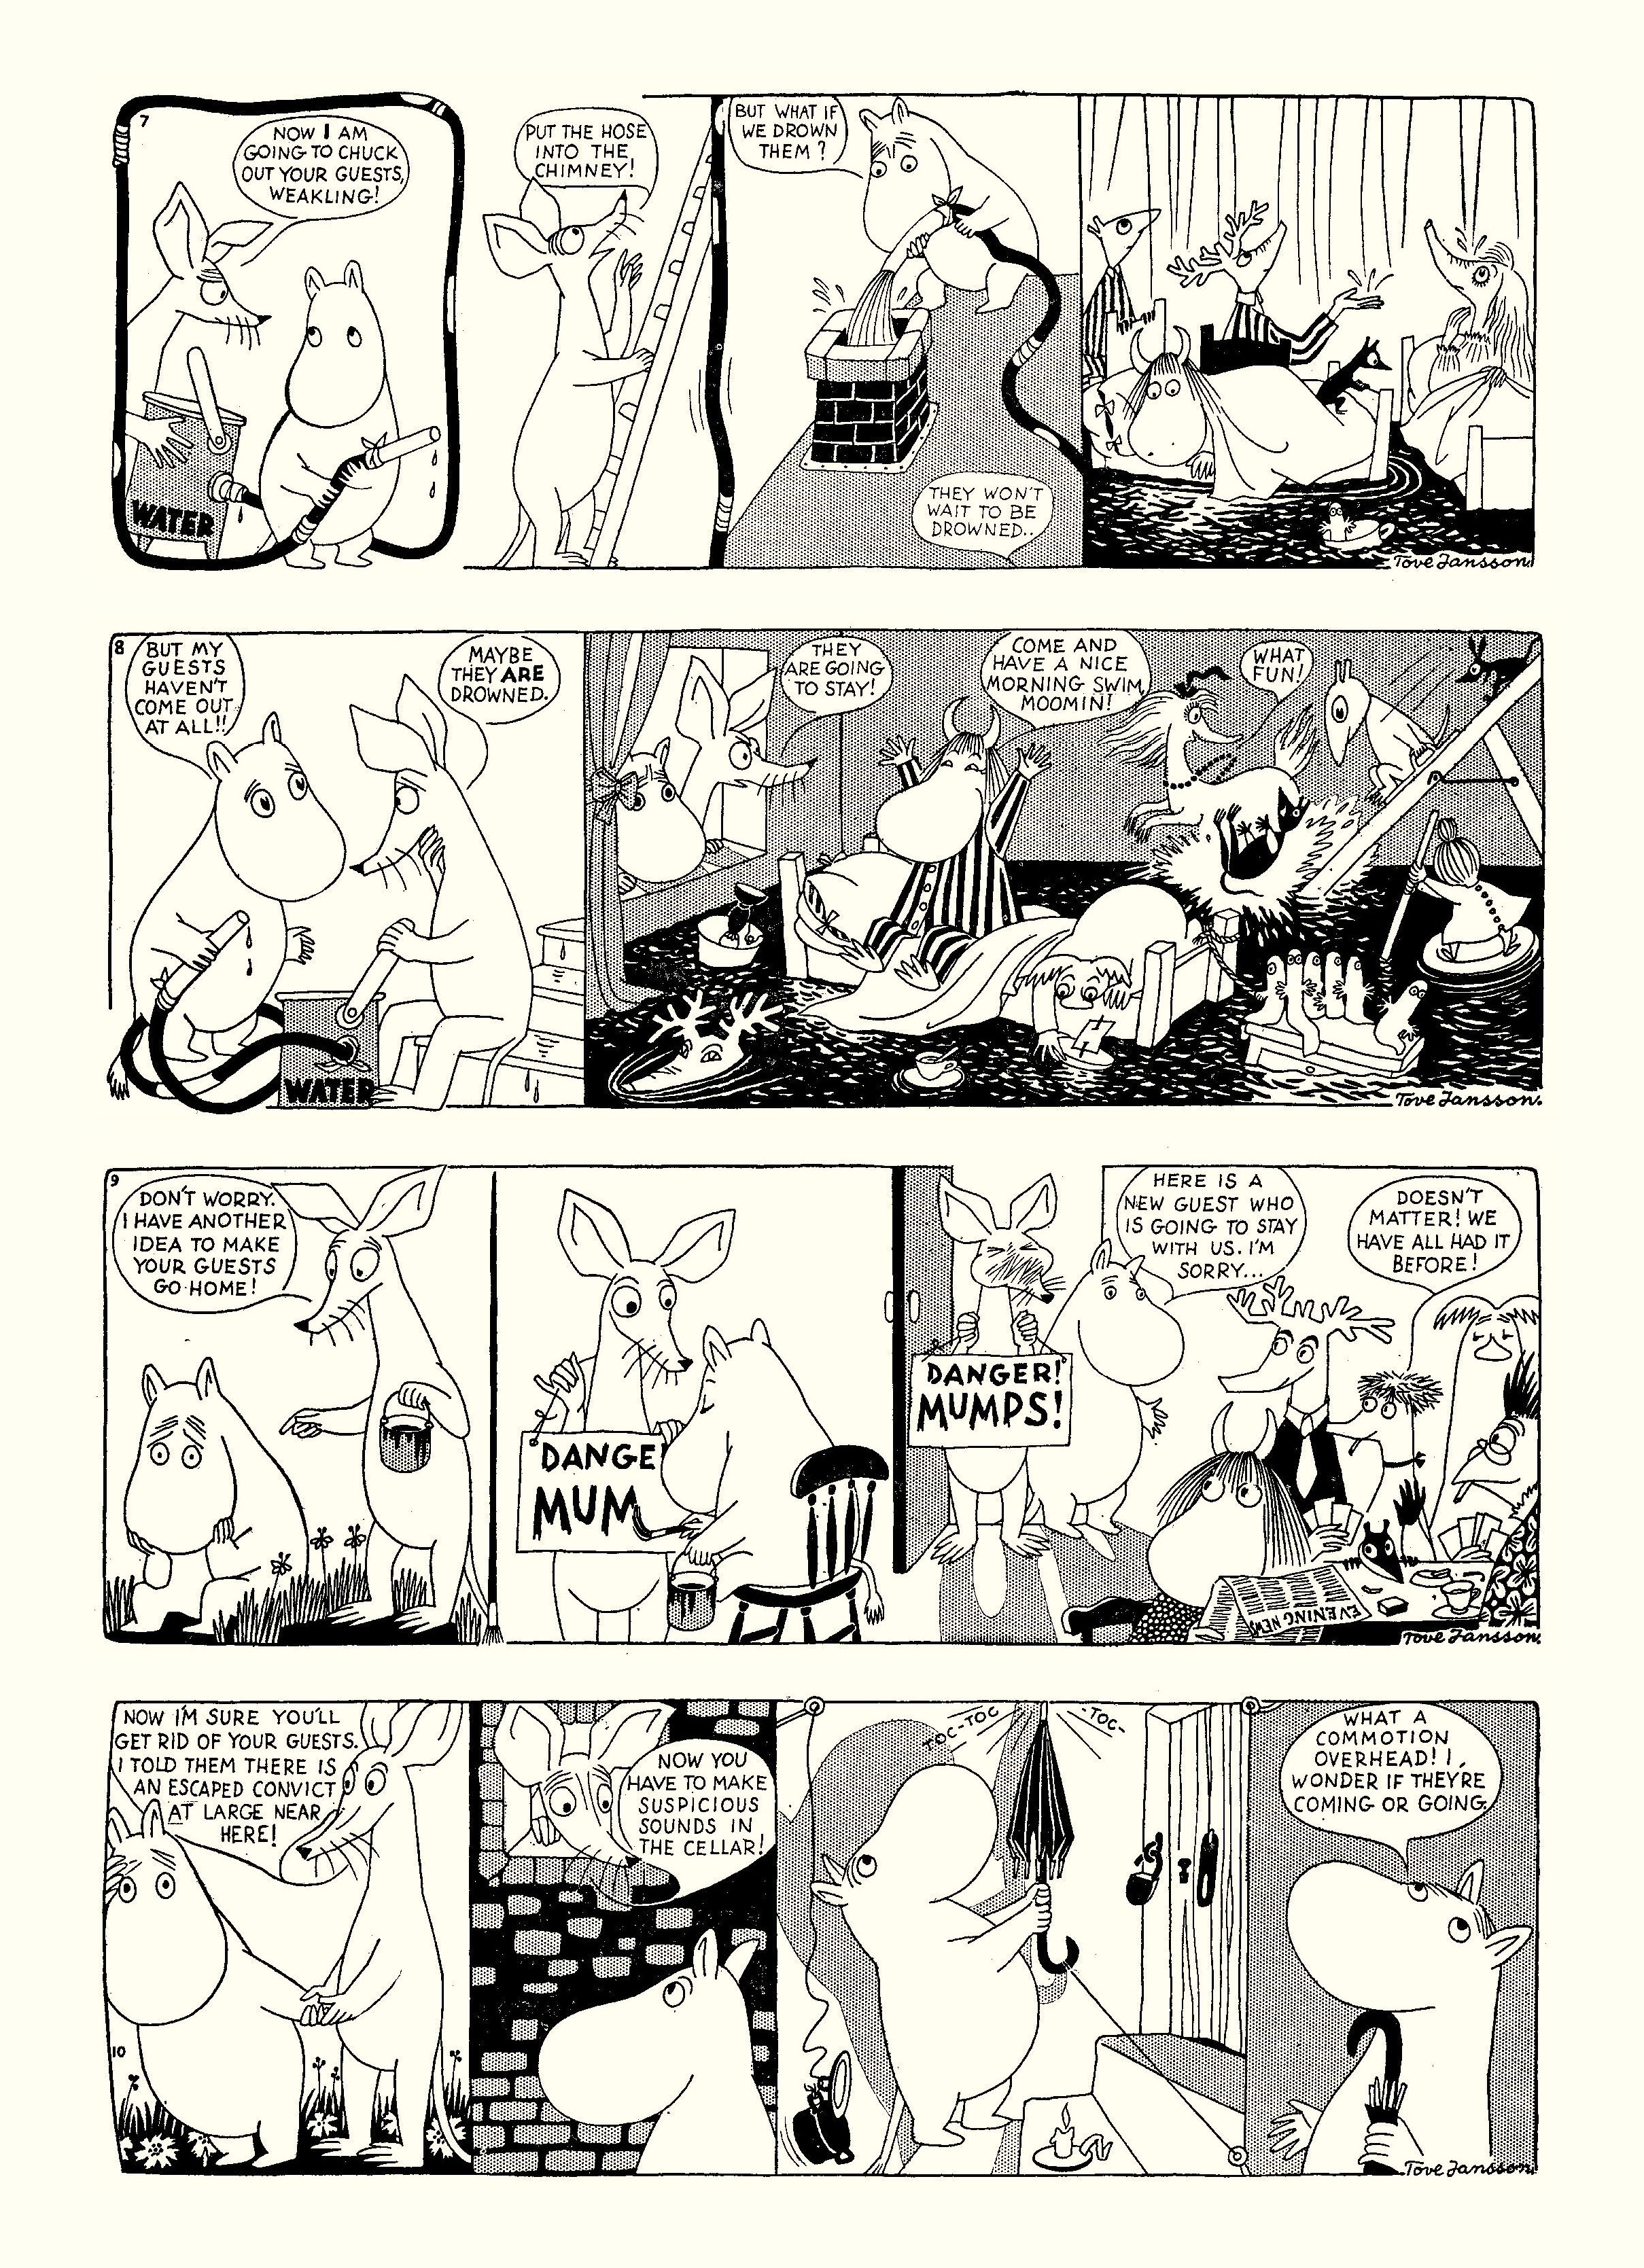 Read online Moomin: The Complete Tove Jansson Comic Strip comic -  Issue # TPB 1 - 8